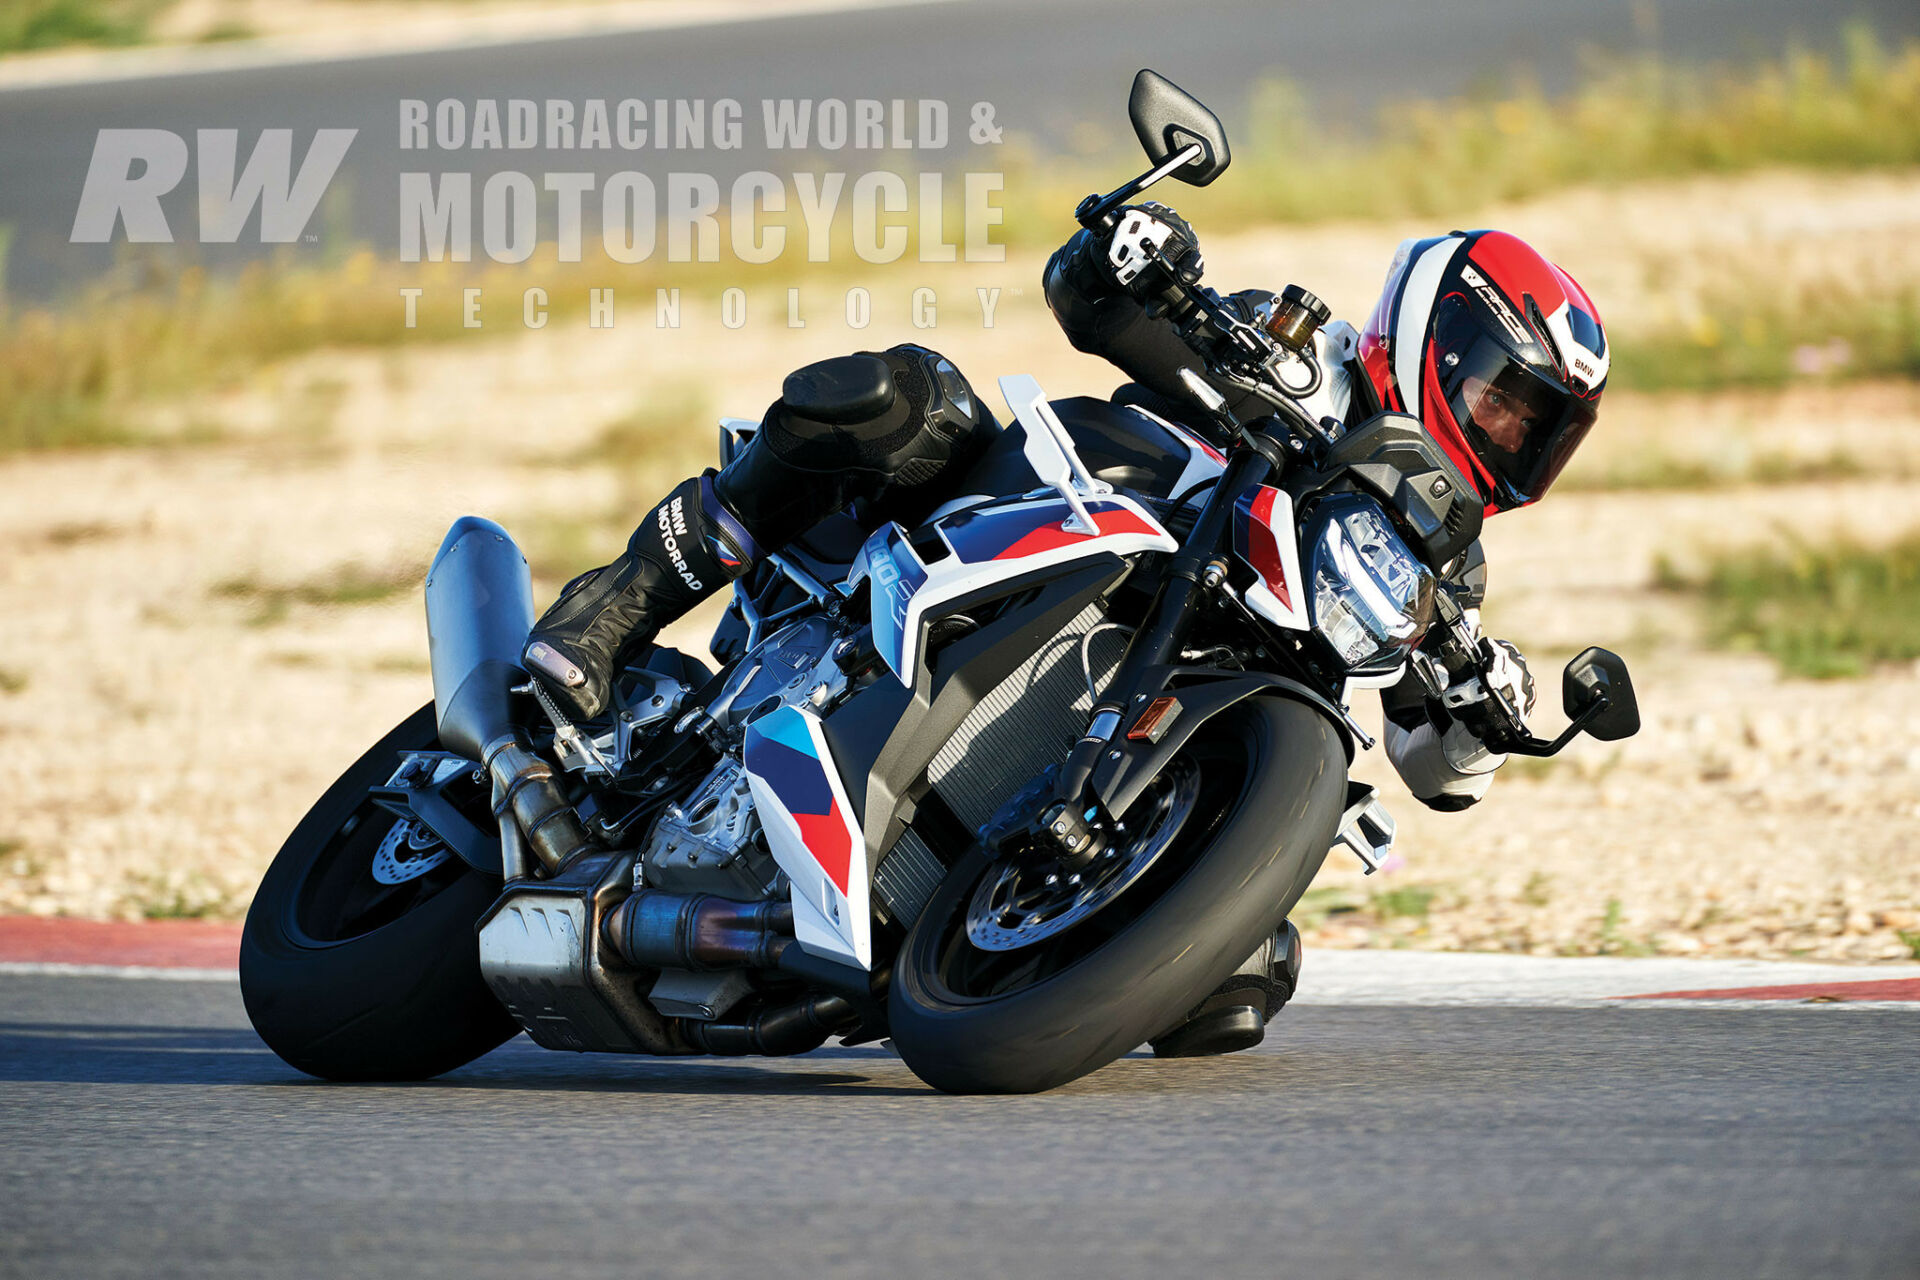 A solid twin-spar chassis, active suspension and advanced electronic riding aids make the BMW M 1000 R fun. A comfortable riding position means less fatigue, which means more time on the track. Photo by caliphotography.com.  